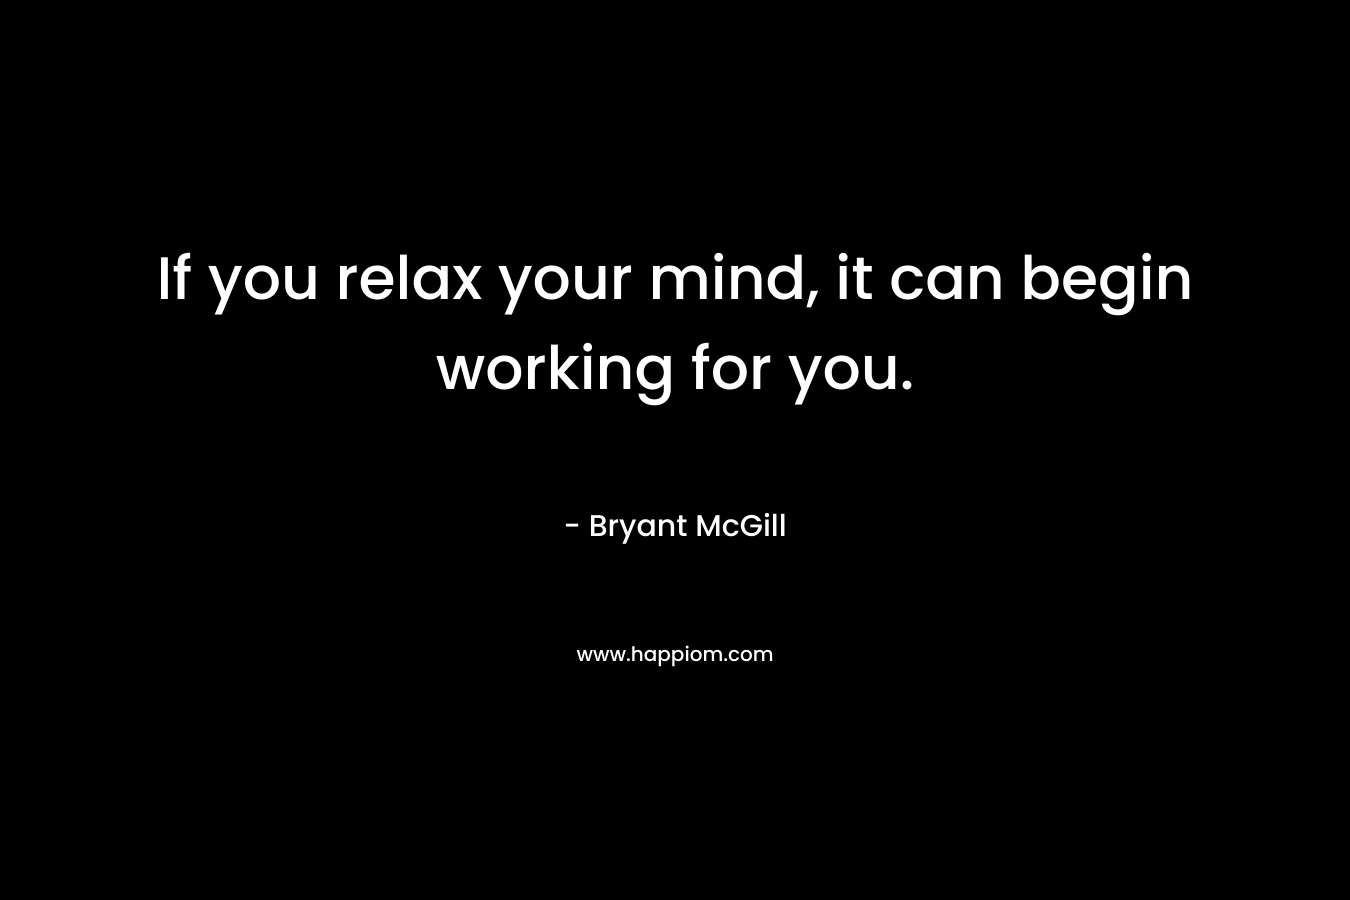 If you relax your mind, it can begin working for you.